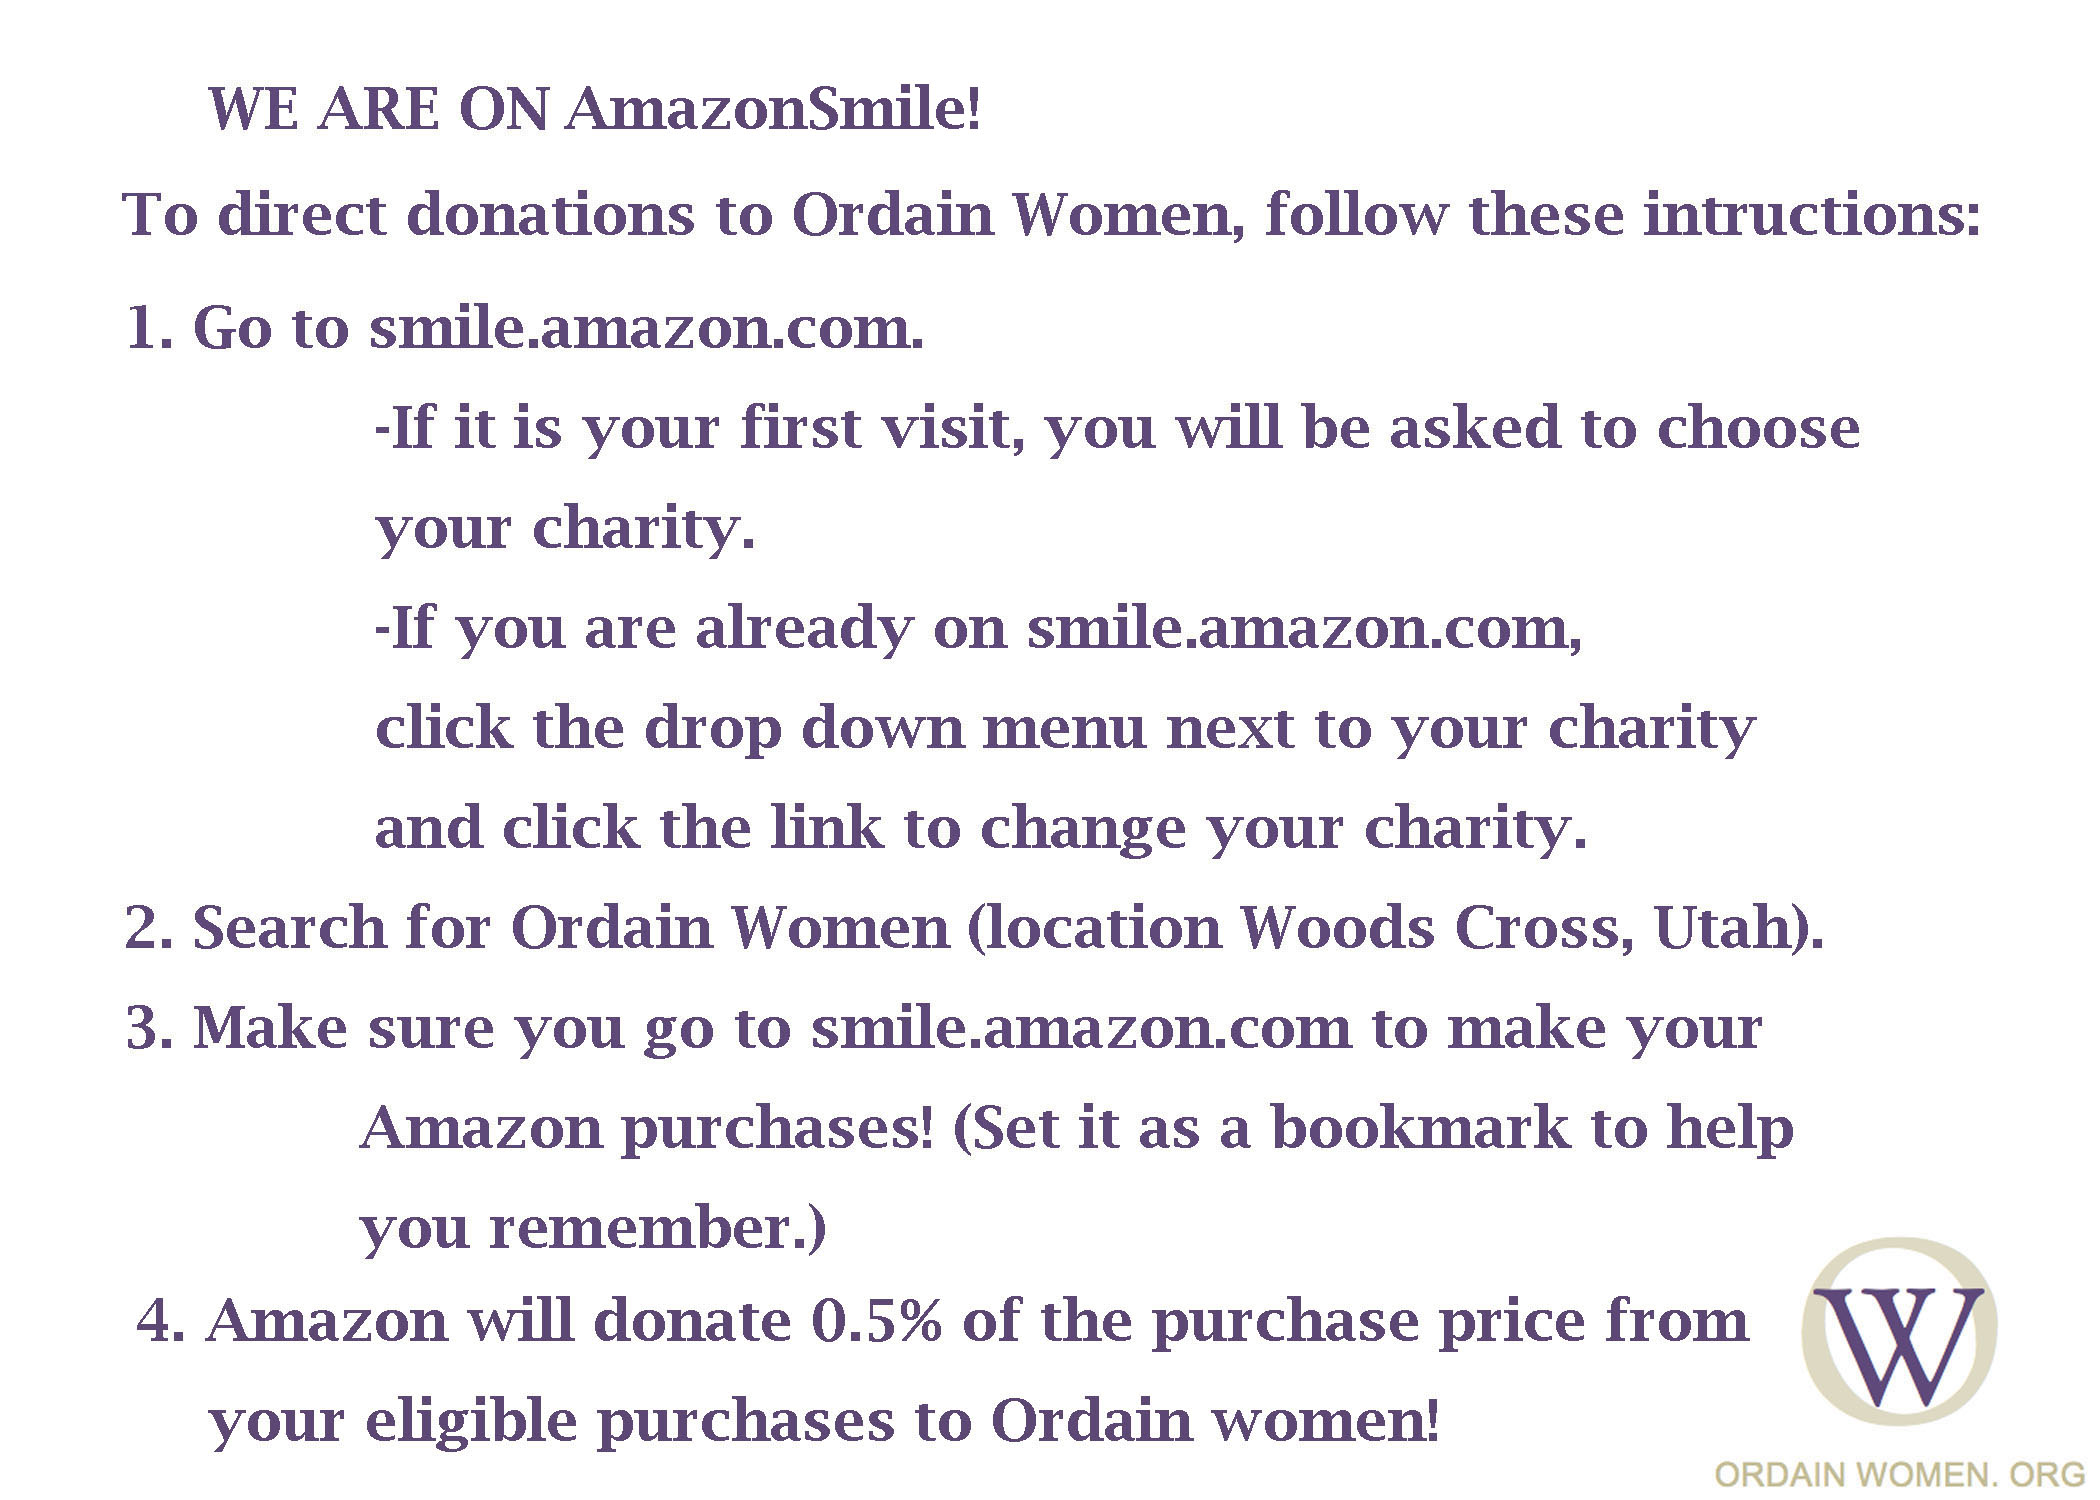 Image, Text reads: We are on AmazonSmile To direct donations to Ordain Women, follow these instructions: 1.	Go to smile.amazon.com. a.	If it is your first visit, you will be asked to choose your charity. b.	If you are already on smile.amazon.com, click the drop down menu next to your charity and click the link to change your charity. 2.	Search for Ordain Women (location Woods Cross, Utah). 3.	Make sure you go to smile.amazon.com to make your Amazon purchases! (Set it as a bookmark to help you remember.) 4.	Amazon will donate 0.5% of the purchase price from your eligible purchases to Ordain Women!